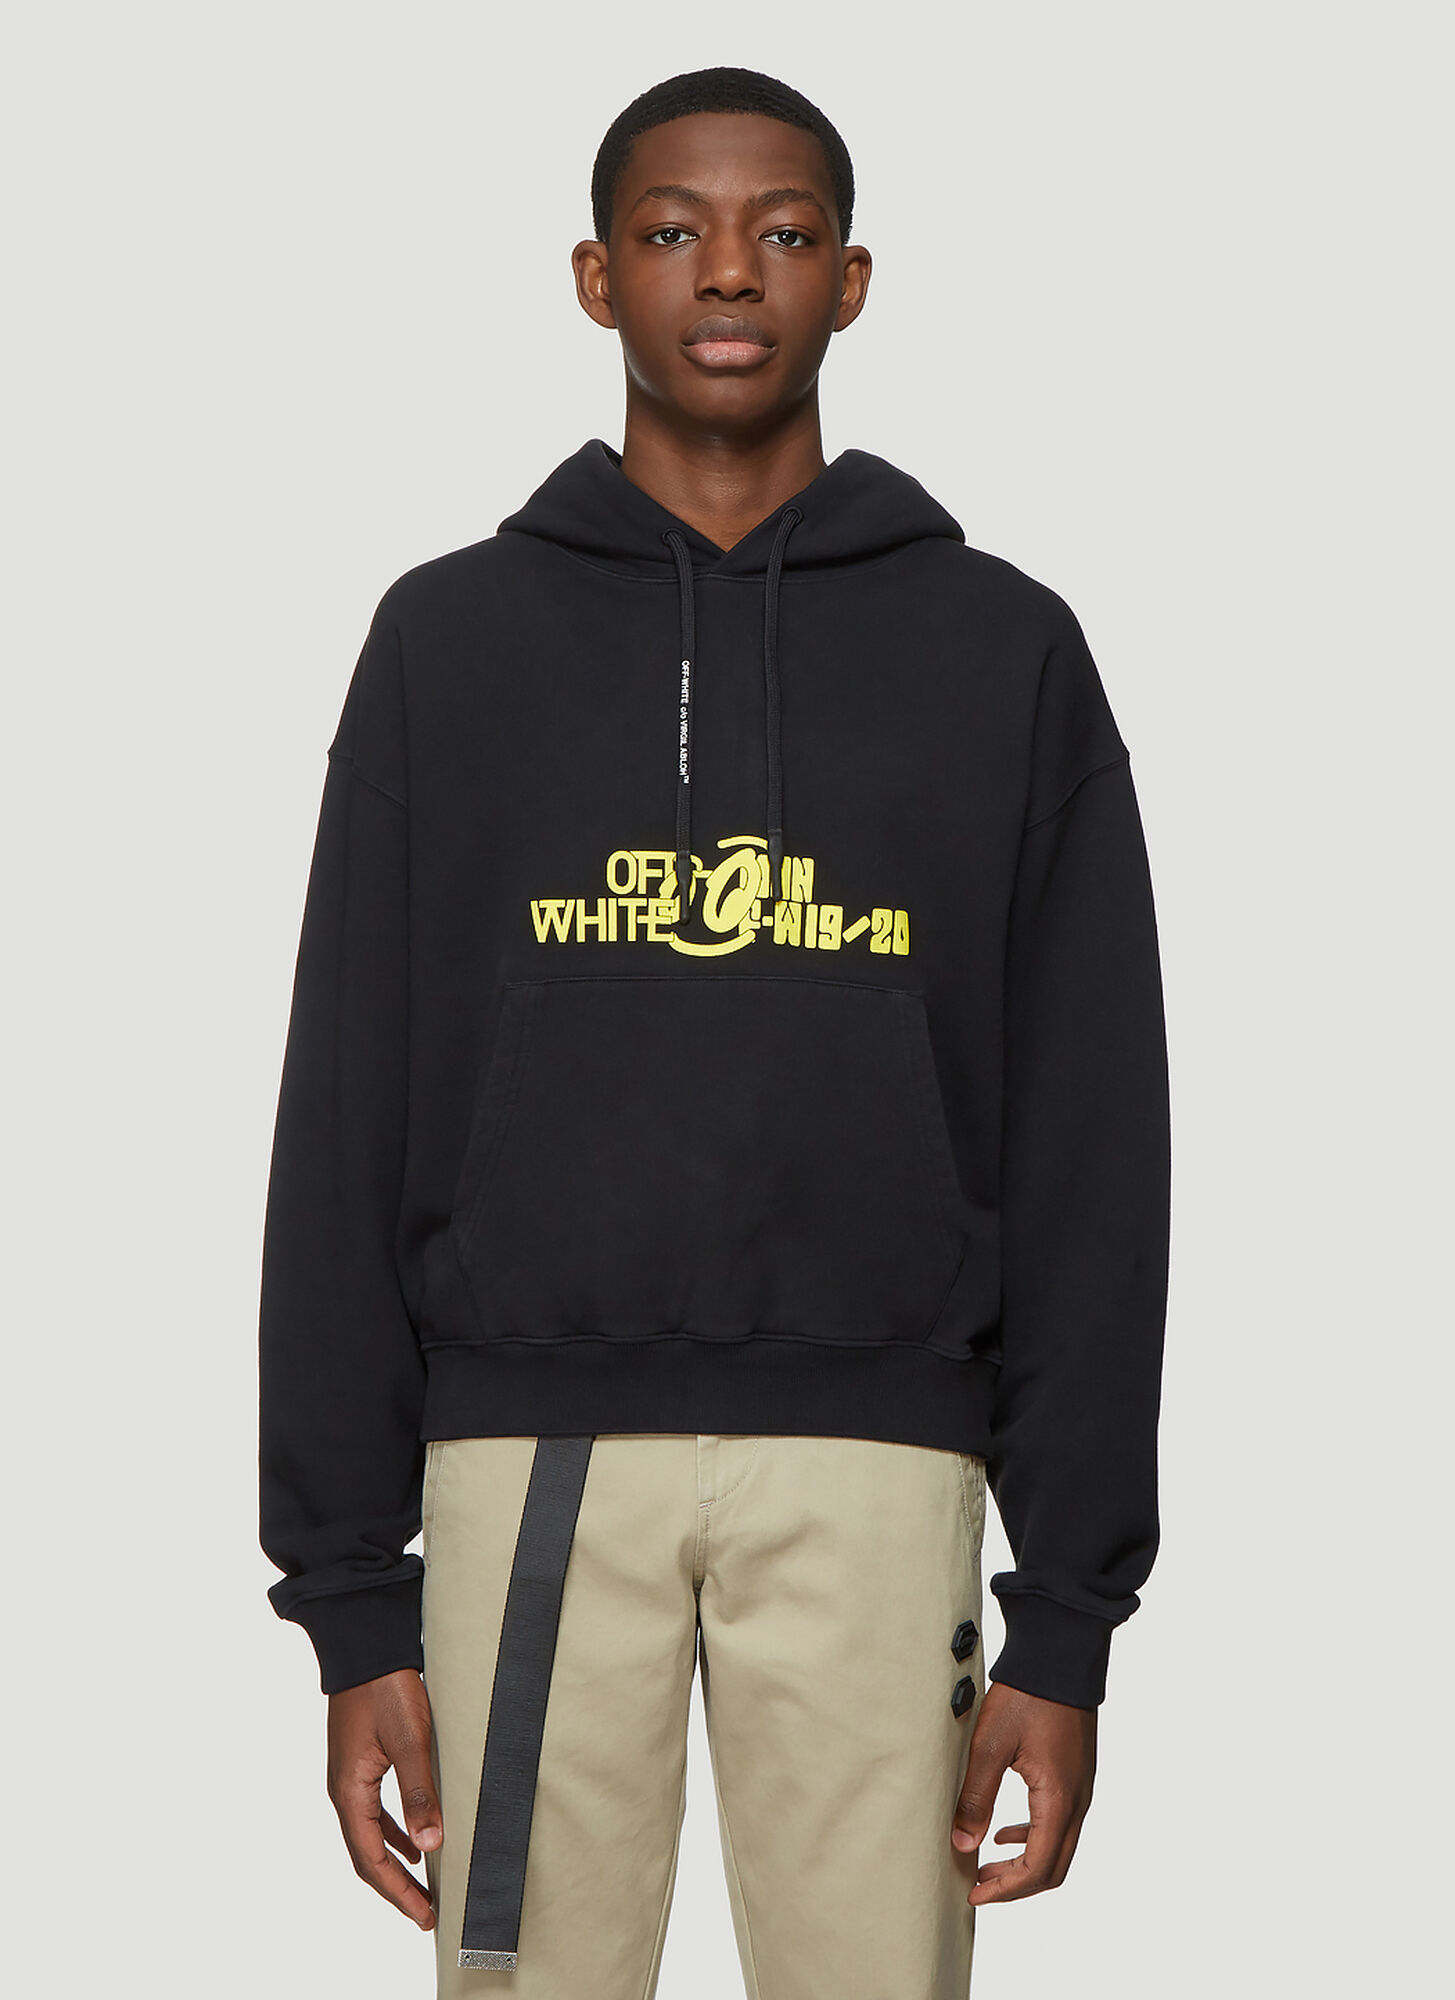 Off-White Halftone Hooded Sweatshirt in Black size M | The Fashionisto